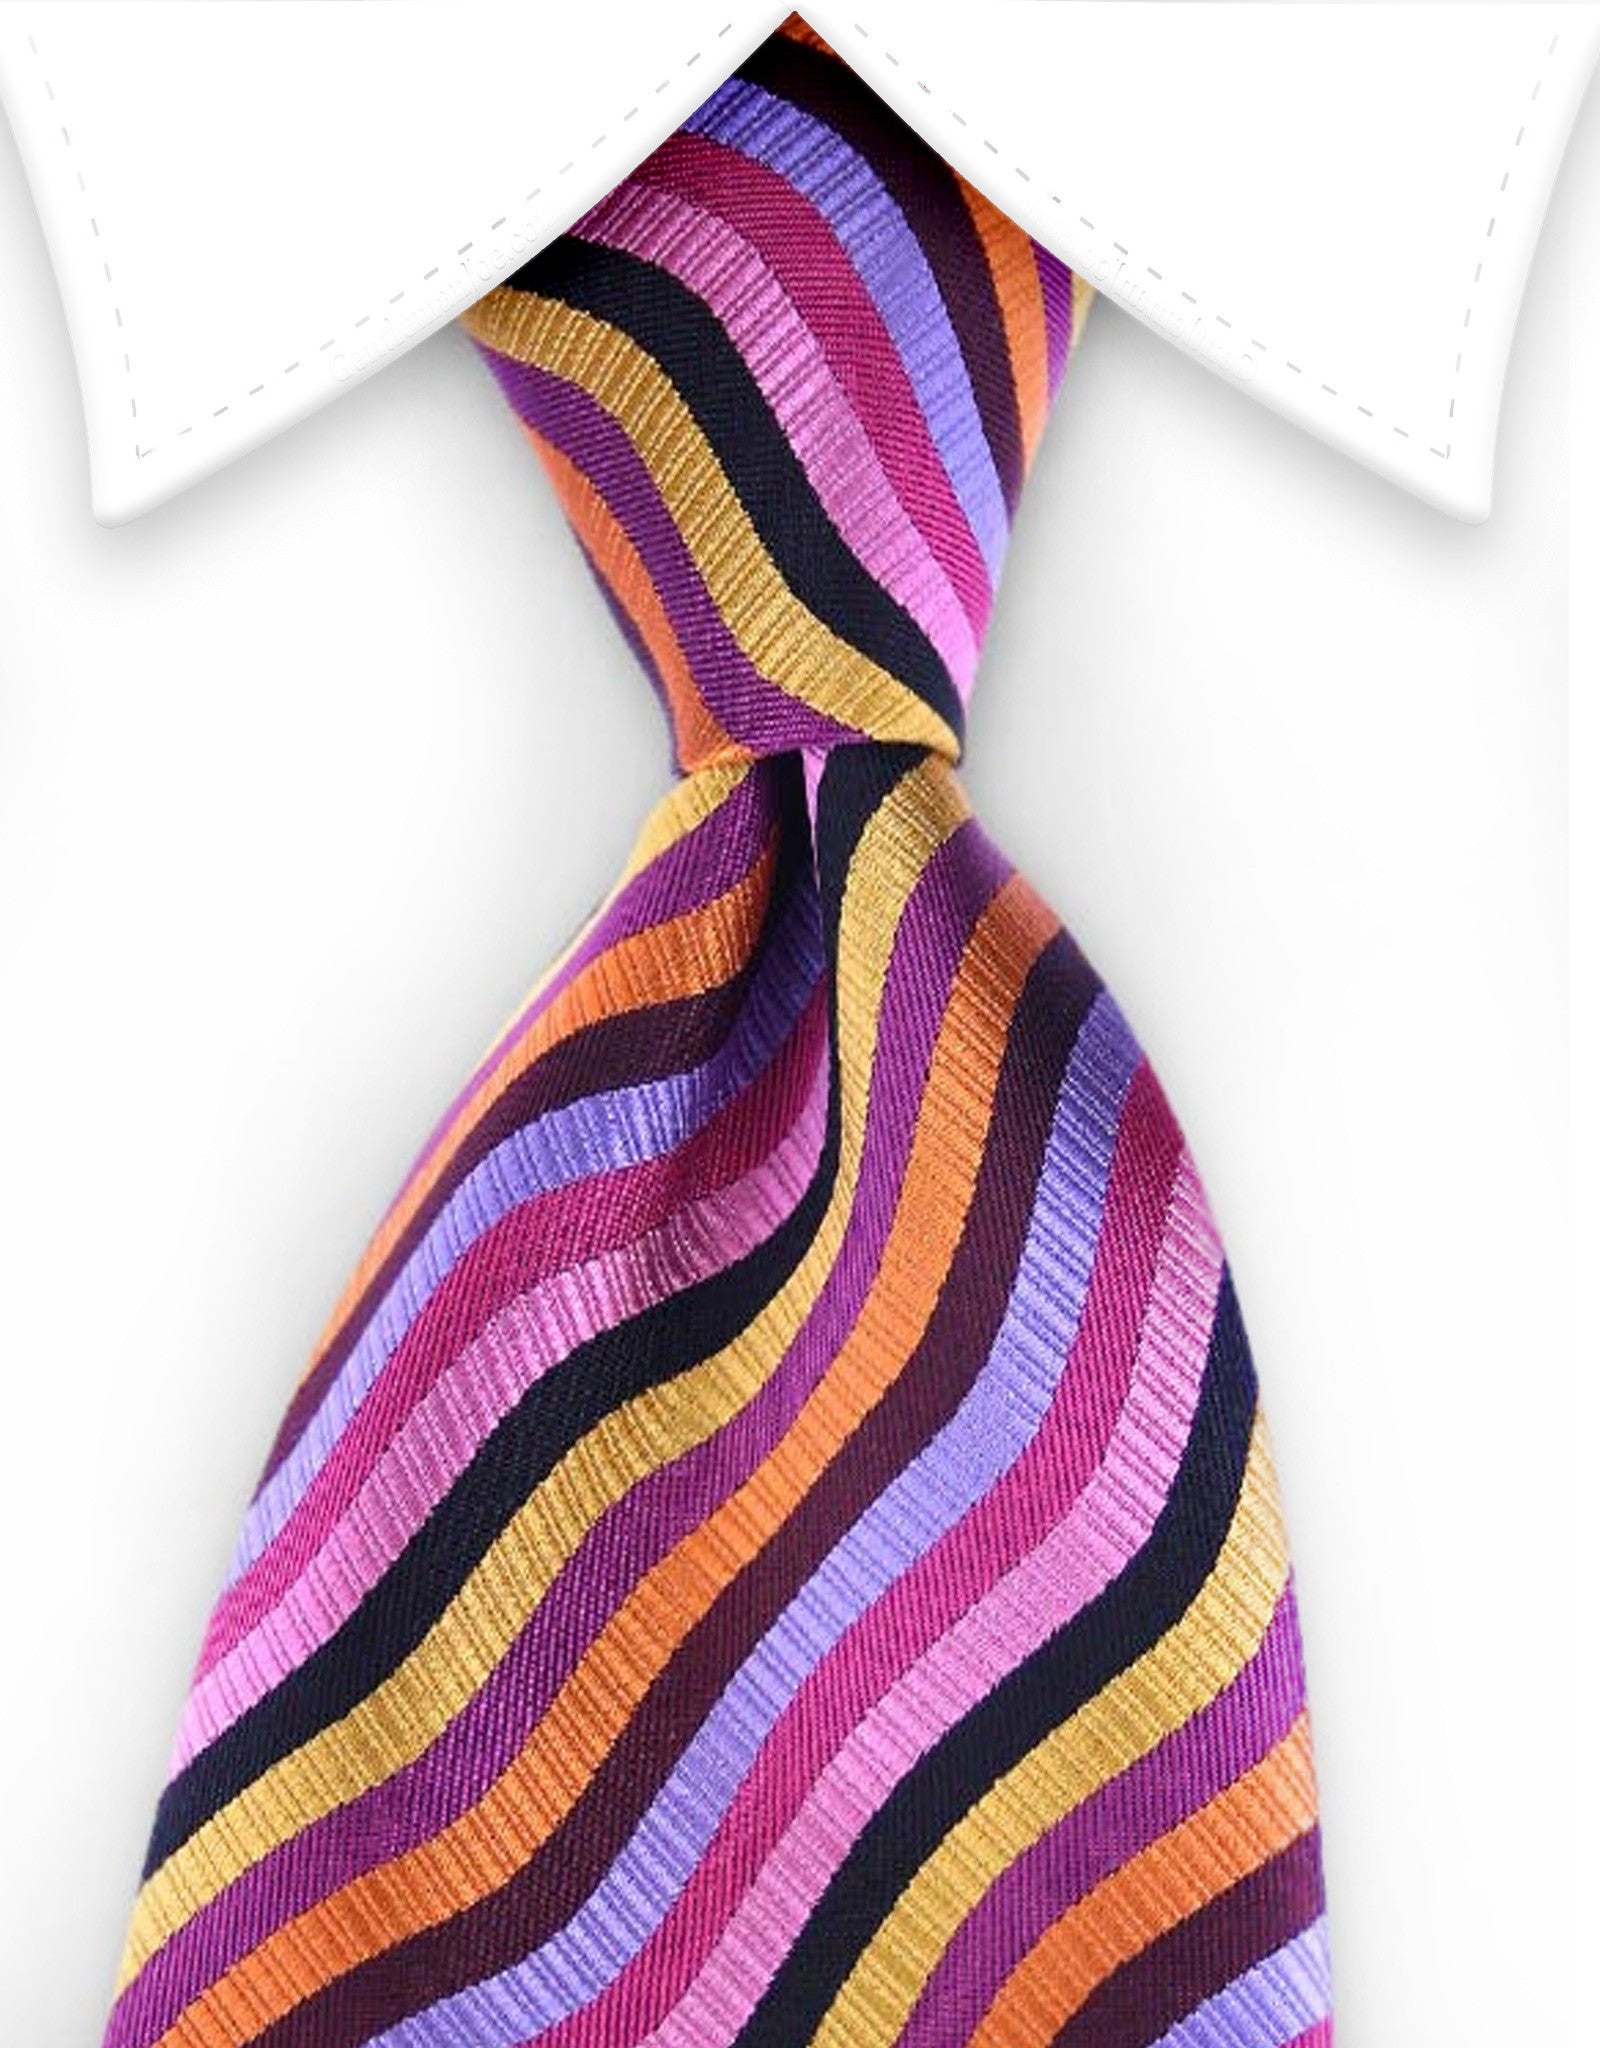  Long Tie Store, Extra Long Necktie for Tall Men, 63 Long  3.75 Wide